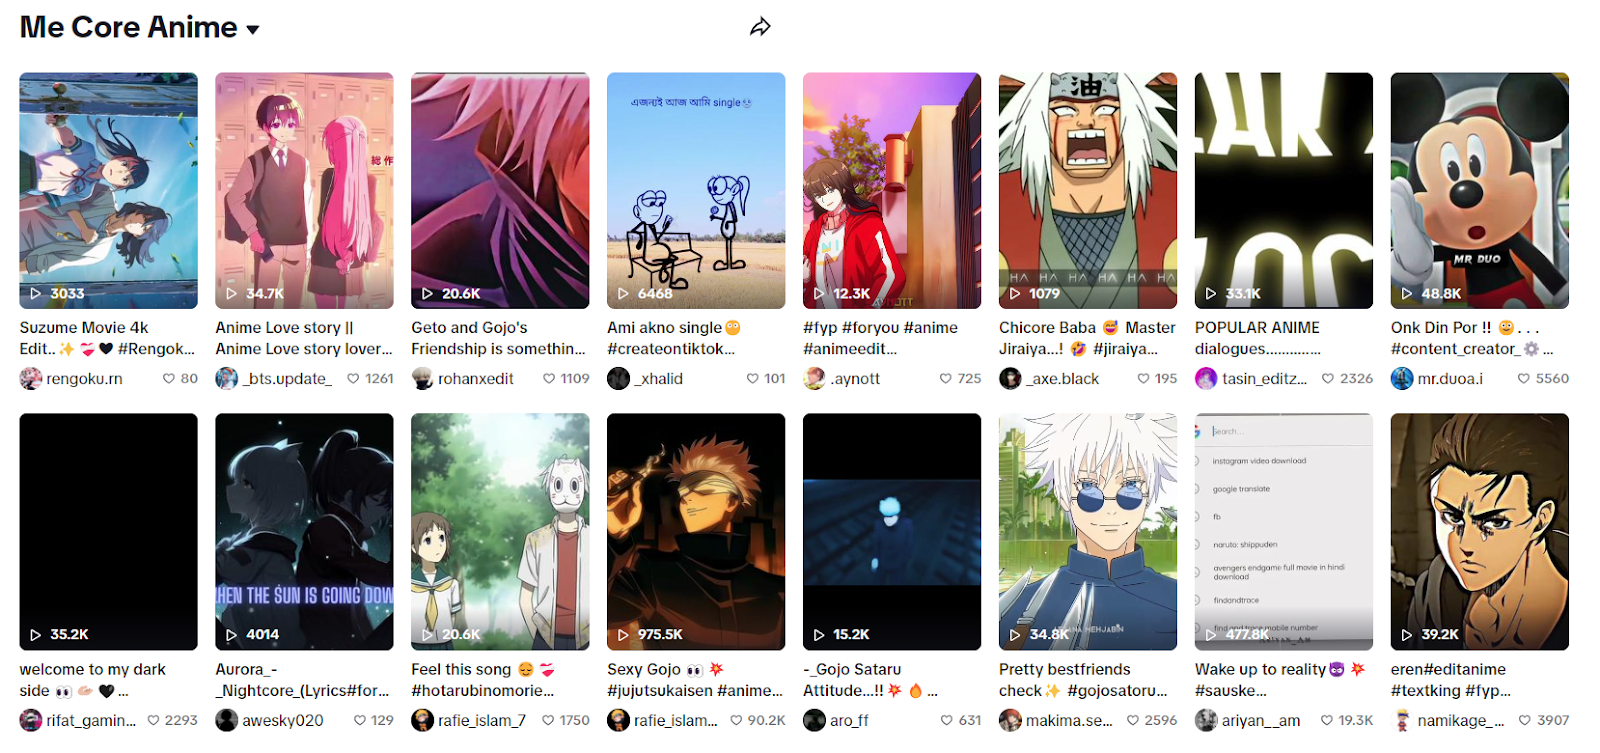 “Me Core” The Anime Trend Is Taking Over TikTok - And It's Delightfully Cringeworthy